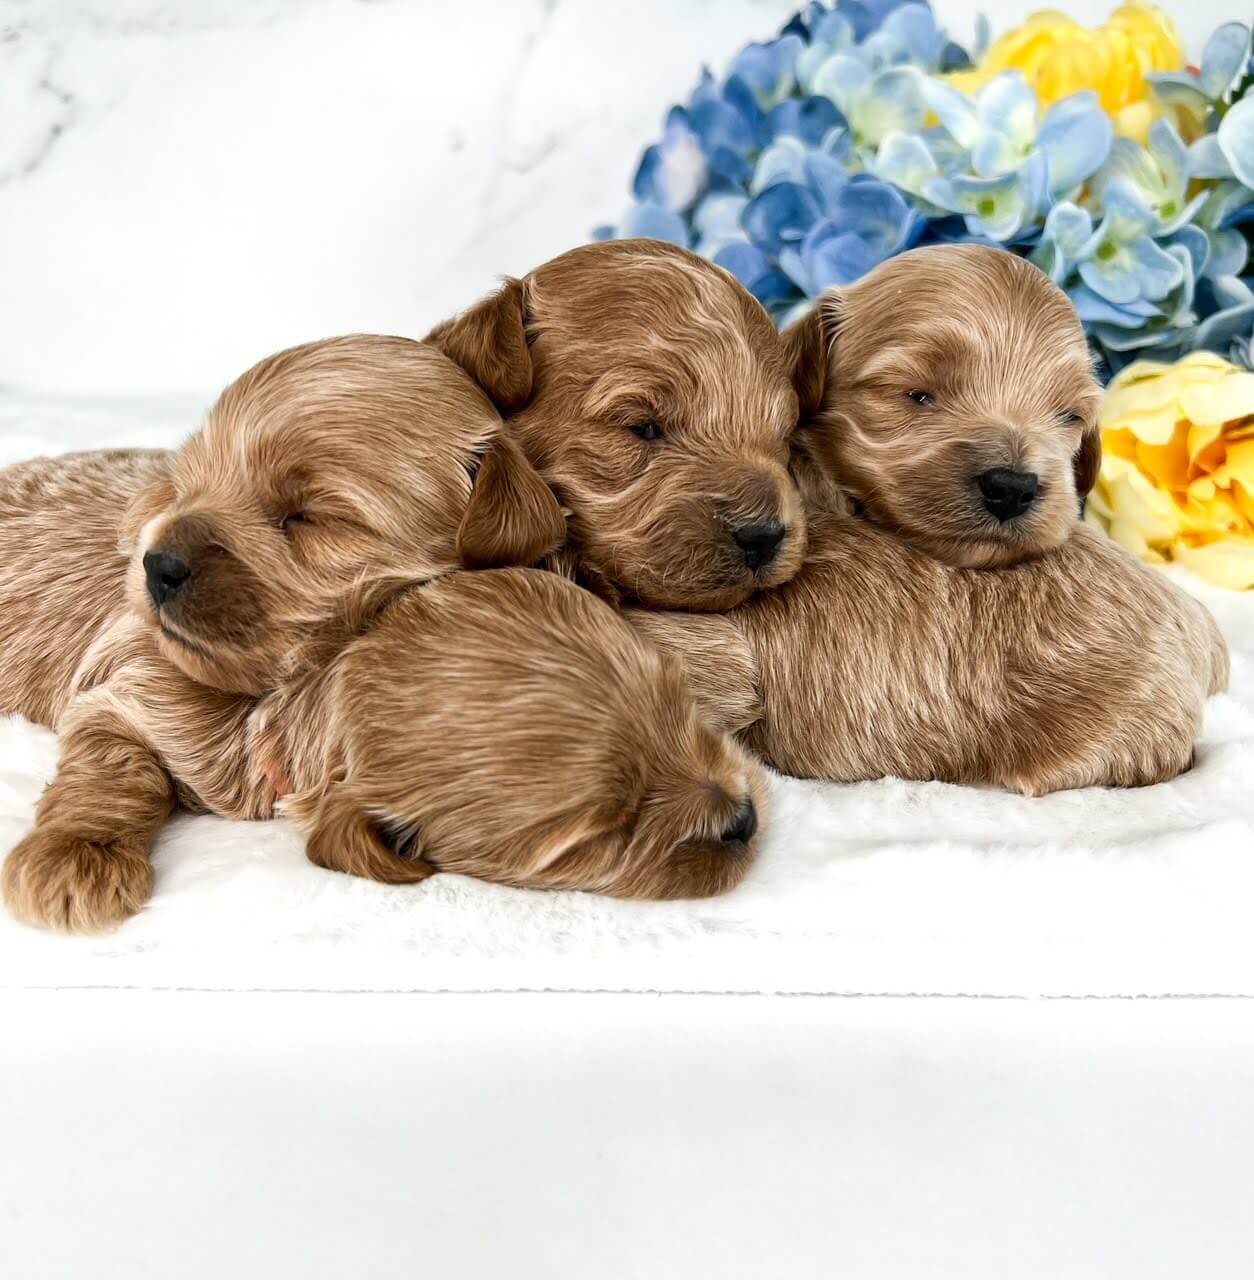 A four of adorable puppies lie in a neat stack, enjoying a moment of tranquility.